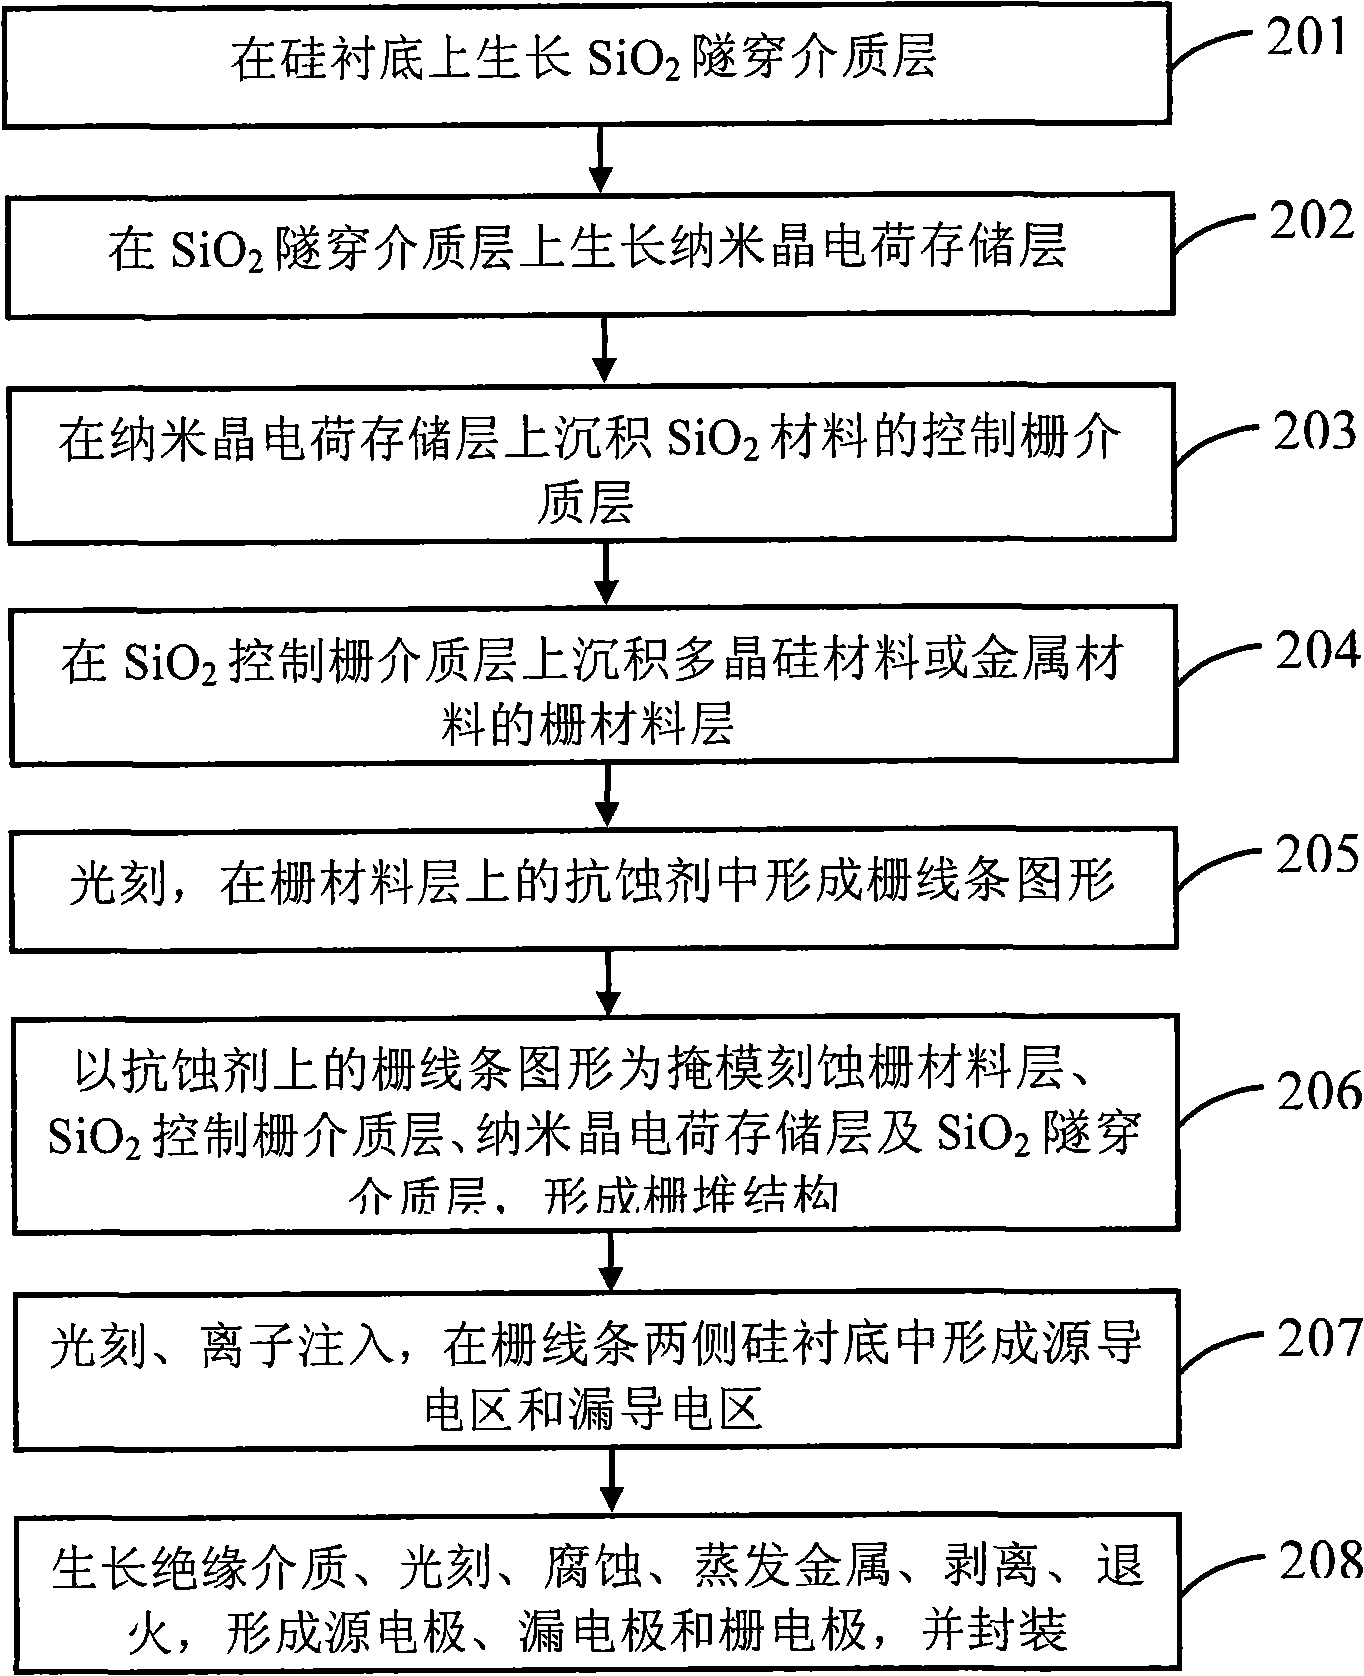 Nanocrystalline floating gate structure non-volatility memory cell and its manufacture method